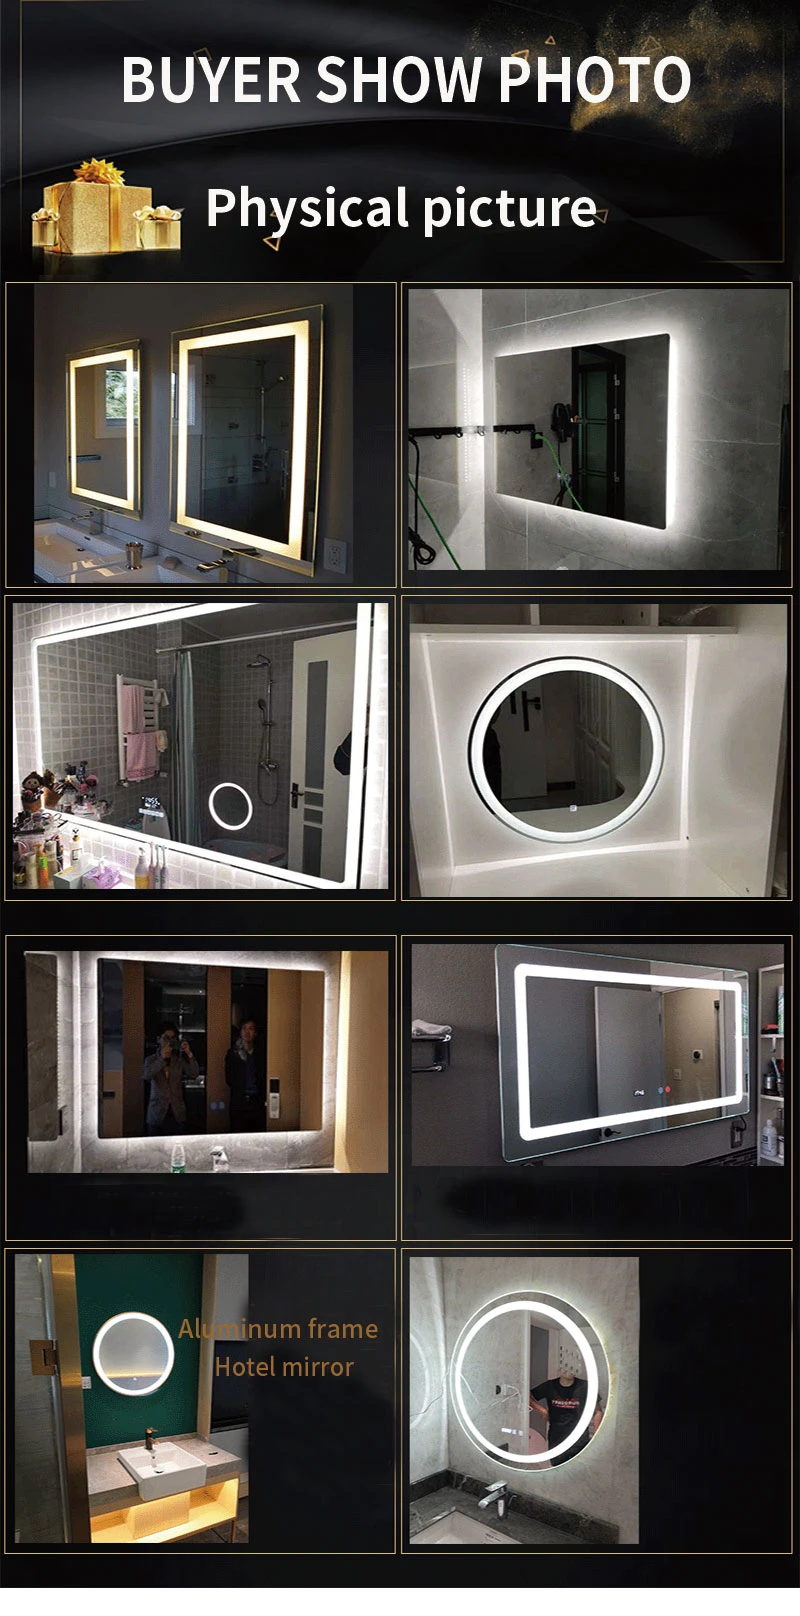 China Factory Luxury Interior Mirror Bathroom LED Mirror Illuminated LED Wall Mirror for Home Hotel Furniture